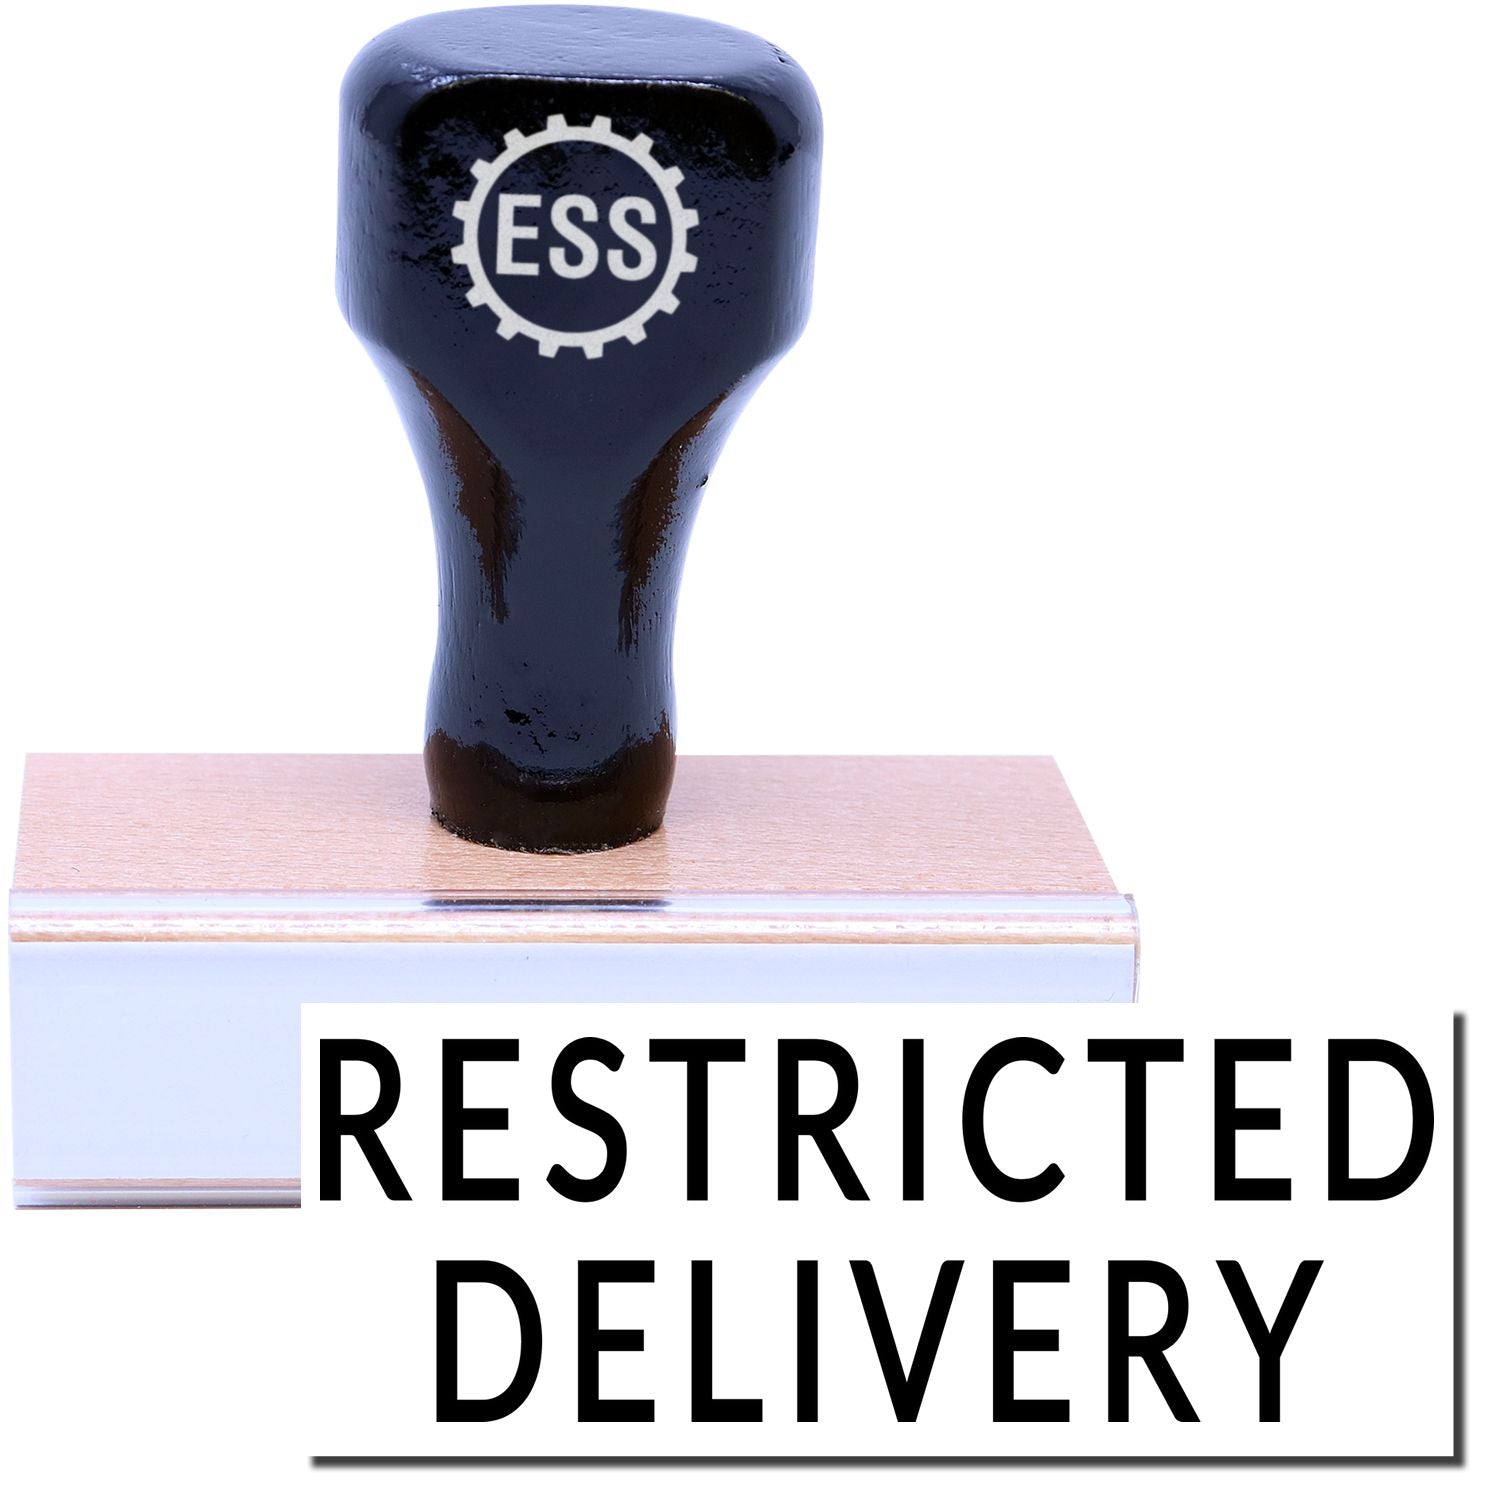 A stock office rubber stamp with a stamped image showing how the text "RESTRICTED DELIVERY" is displayed after stamping.